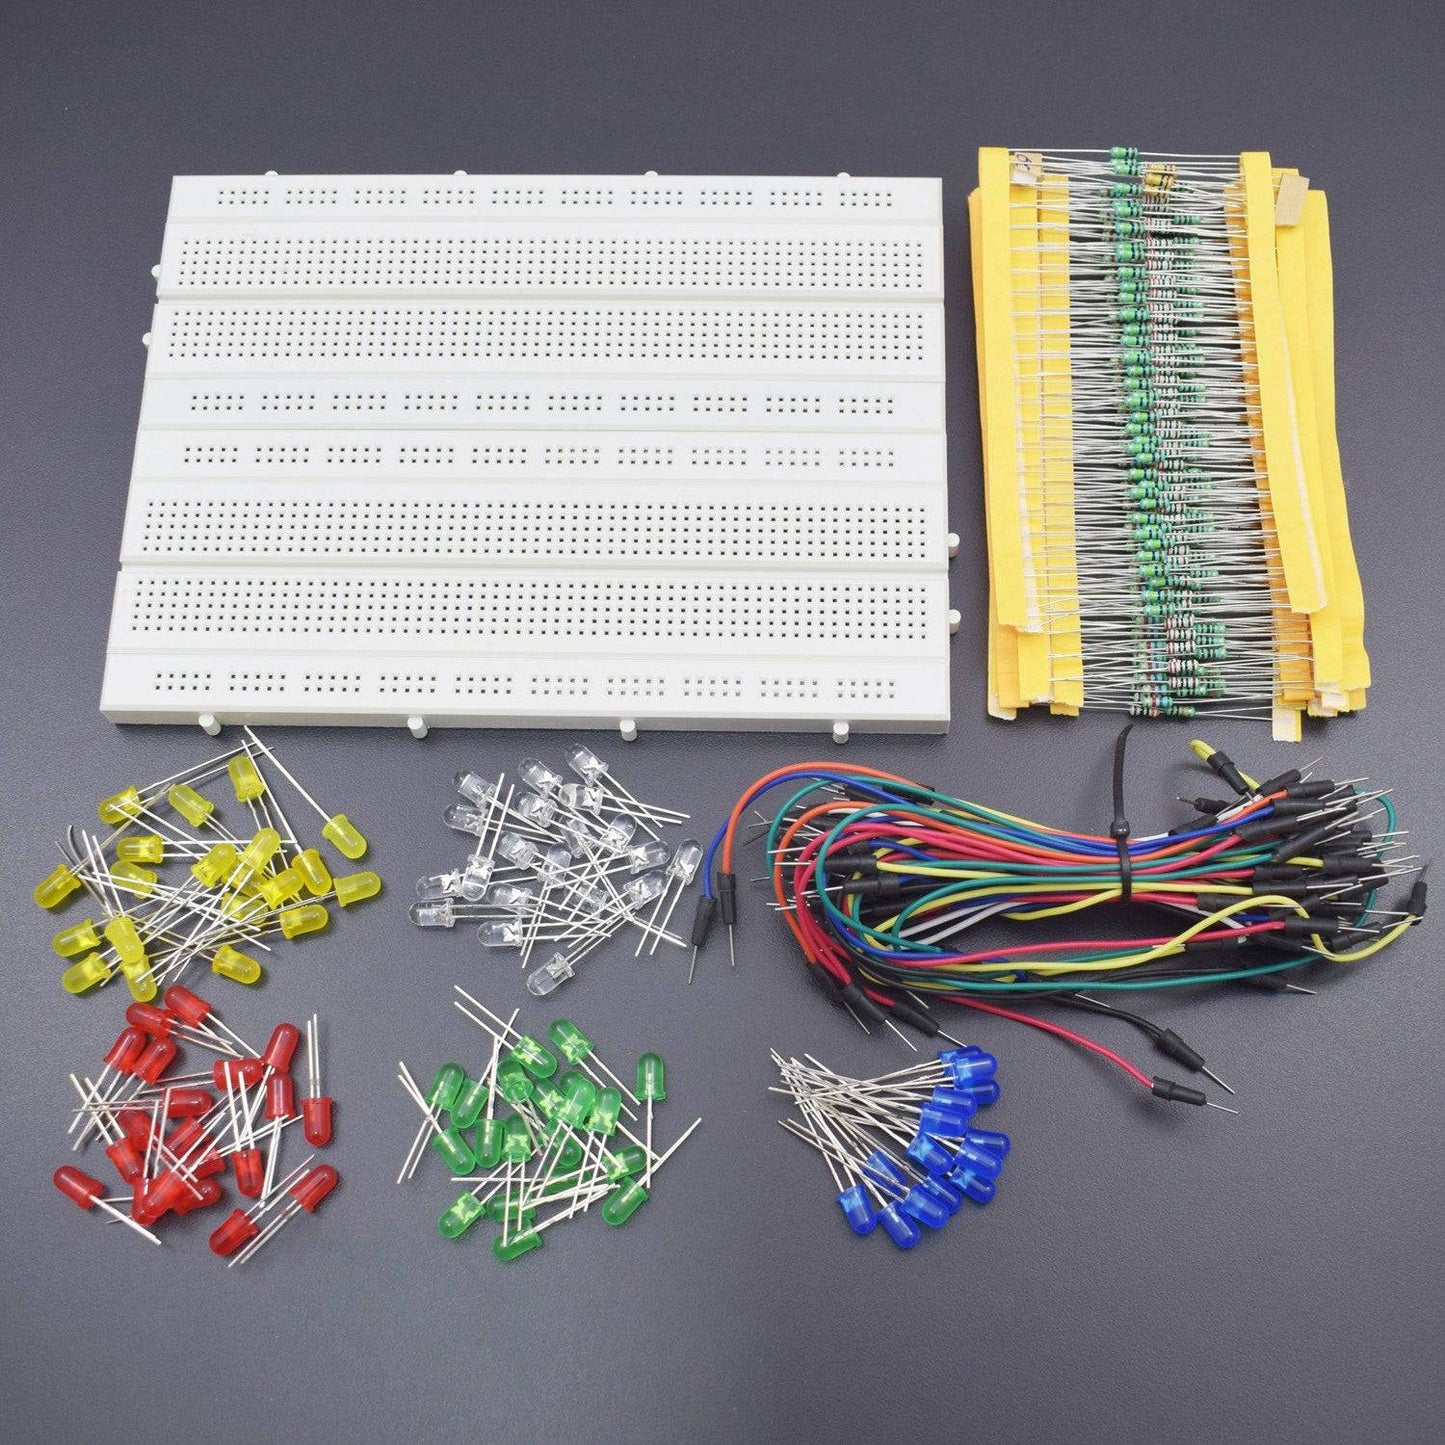 Basic Starter Kit with Breadboard, Power Supply, Jumper Wires, Resistors,  LED, Compatible with Arduino R3, Mega2560, Nano, Raspberry Pi - Ideal  Supply Inc (dba Ideal Blasting Supply)